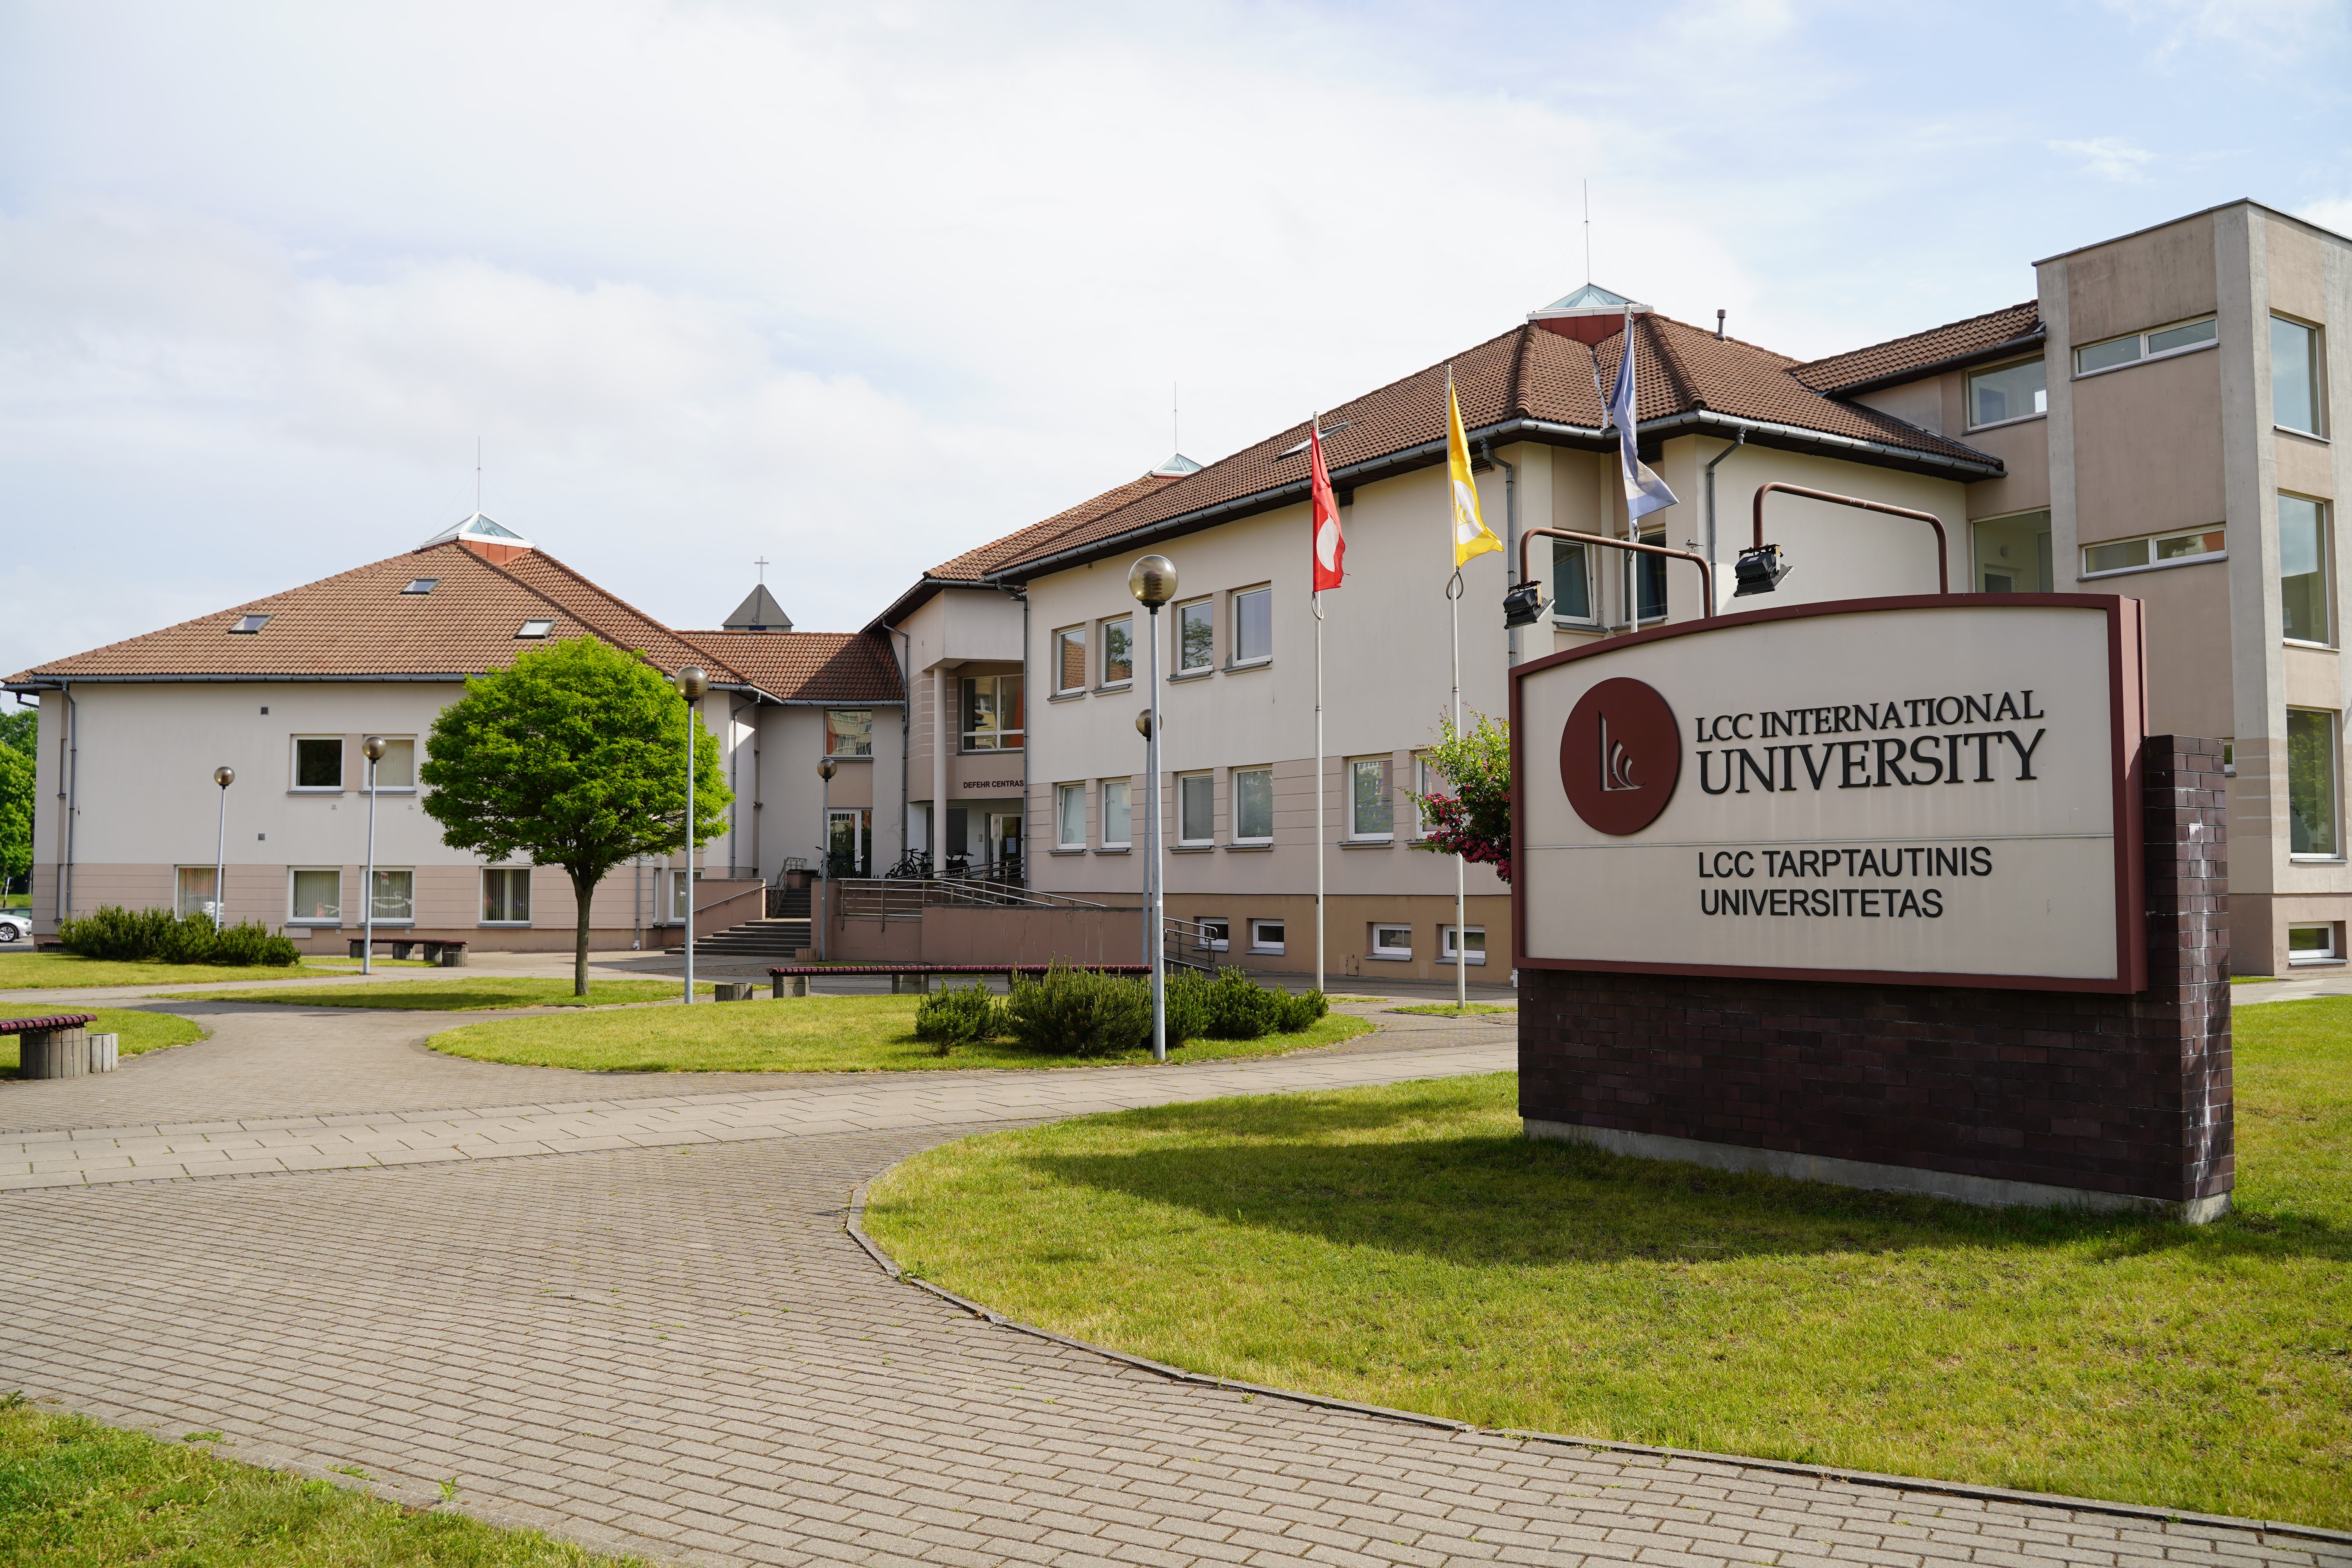 LCC International University has accepted the challenges of COVID-19